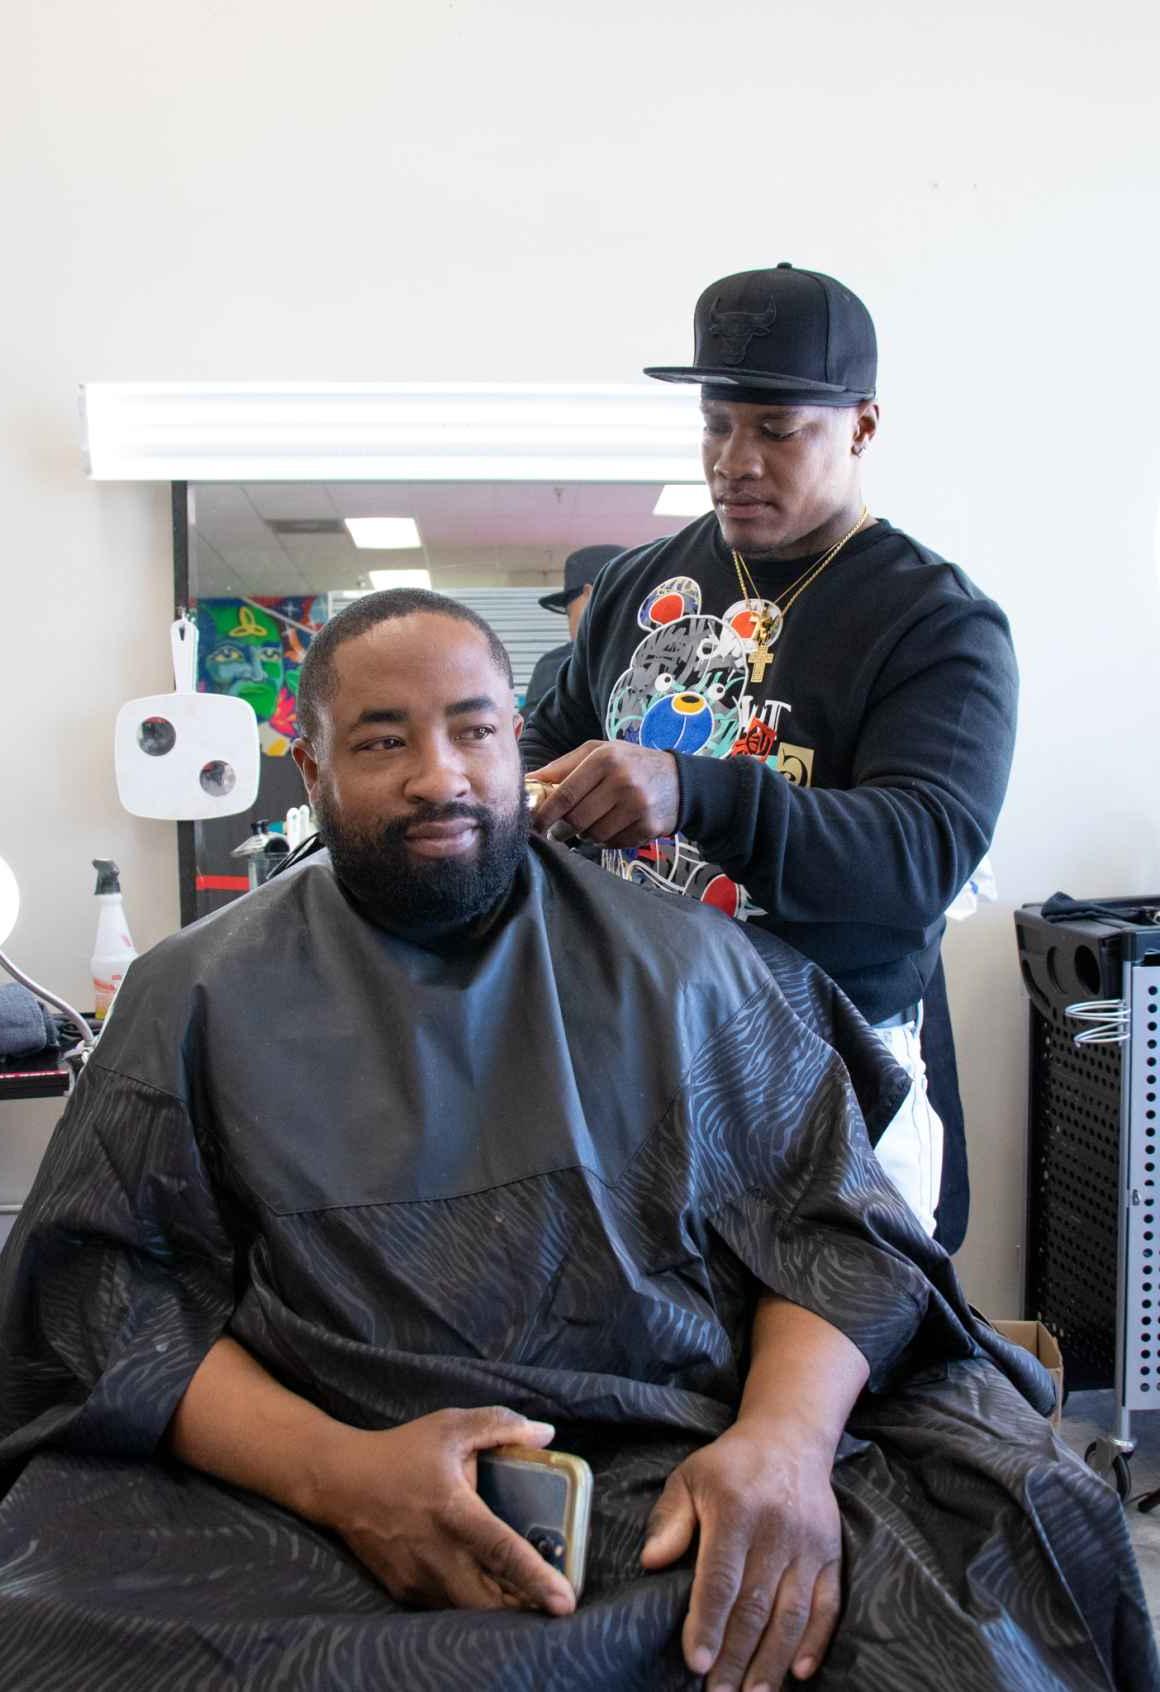 A man gets a haircut at ColoradoSpringsWorks as part of ACLU of Colorado's voter engagement event on October 29, 2022.